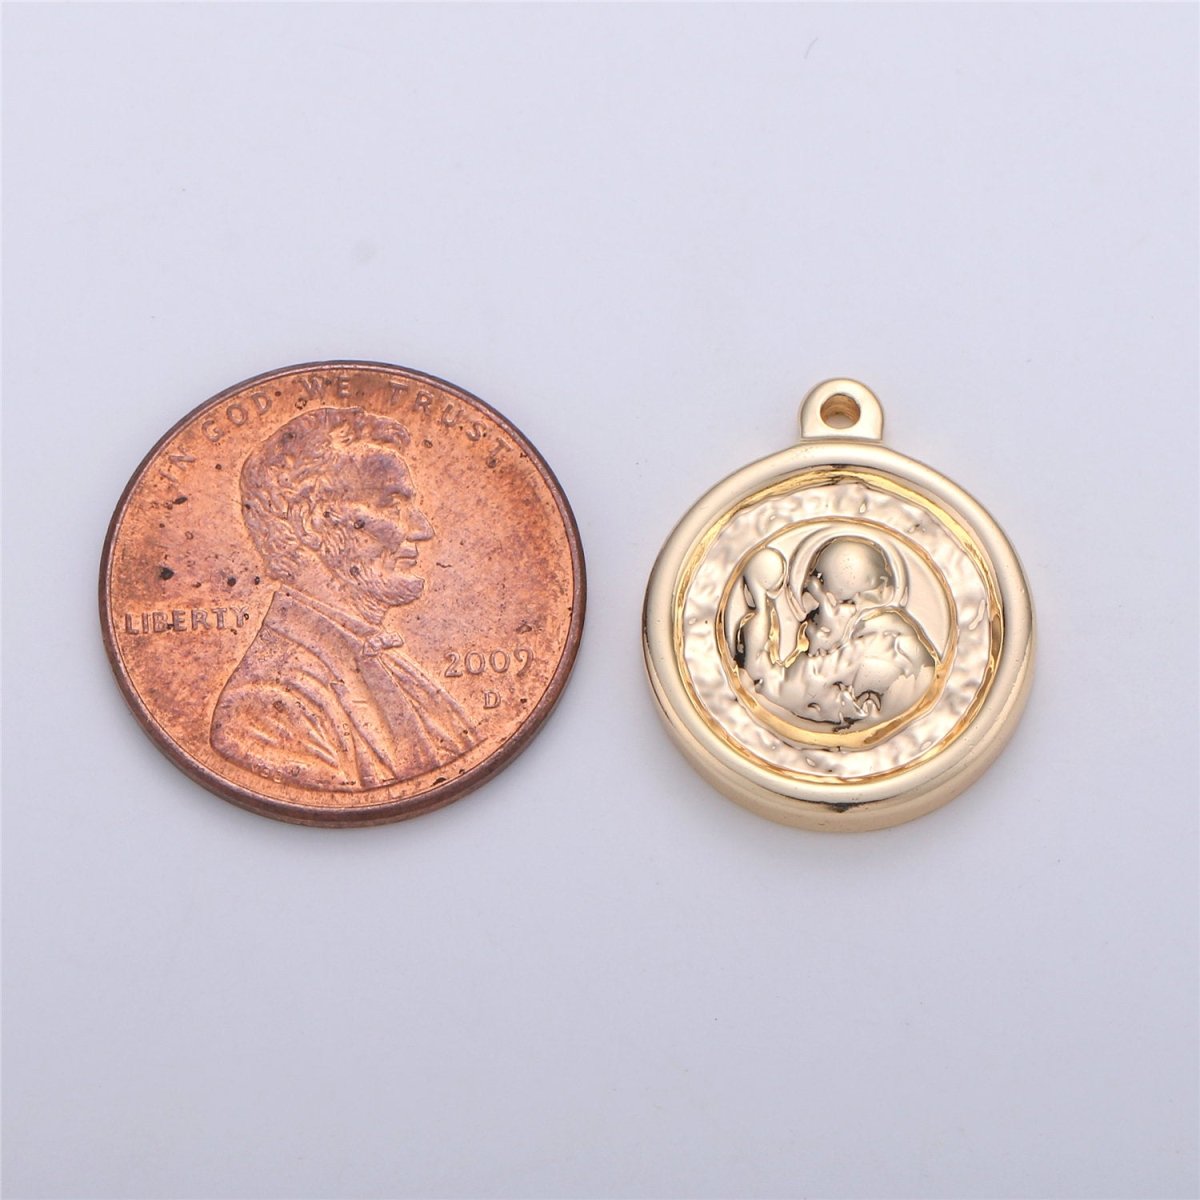 Double Sided Charm Tiny Saint Benedict Charm Coin Disc Charm in gold filled for Necklace Bracelet Earring Component supply, CL-C586 - DLUXCA